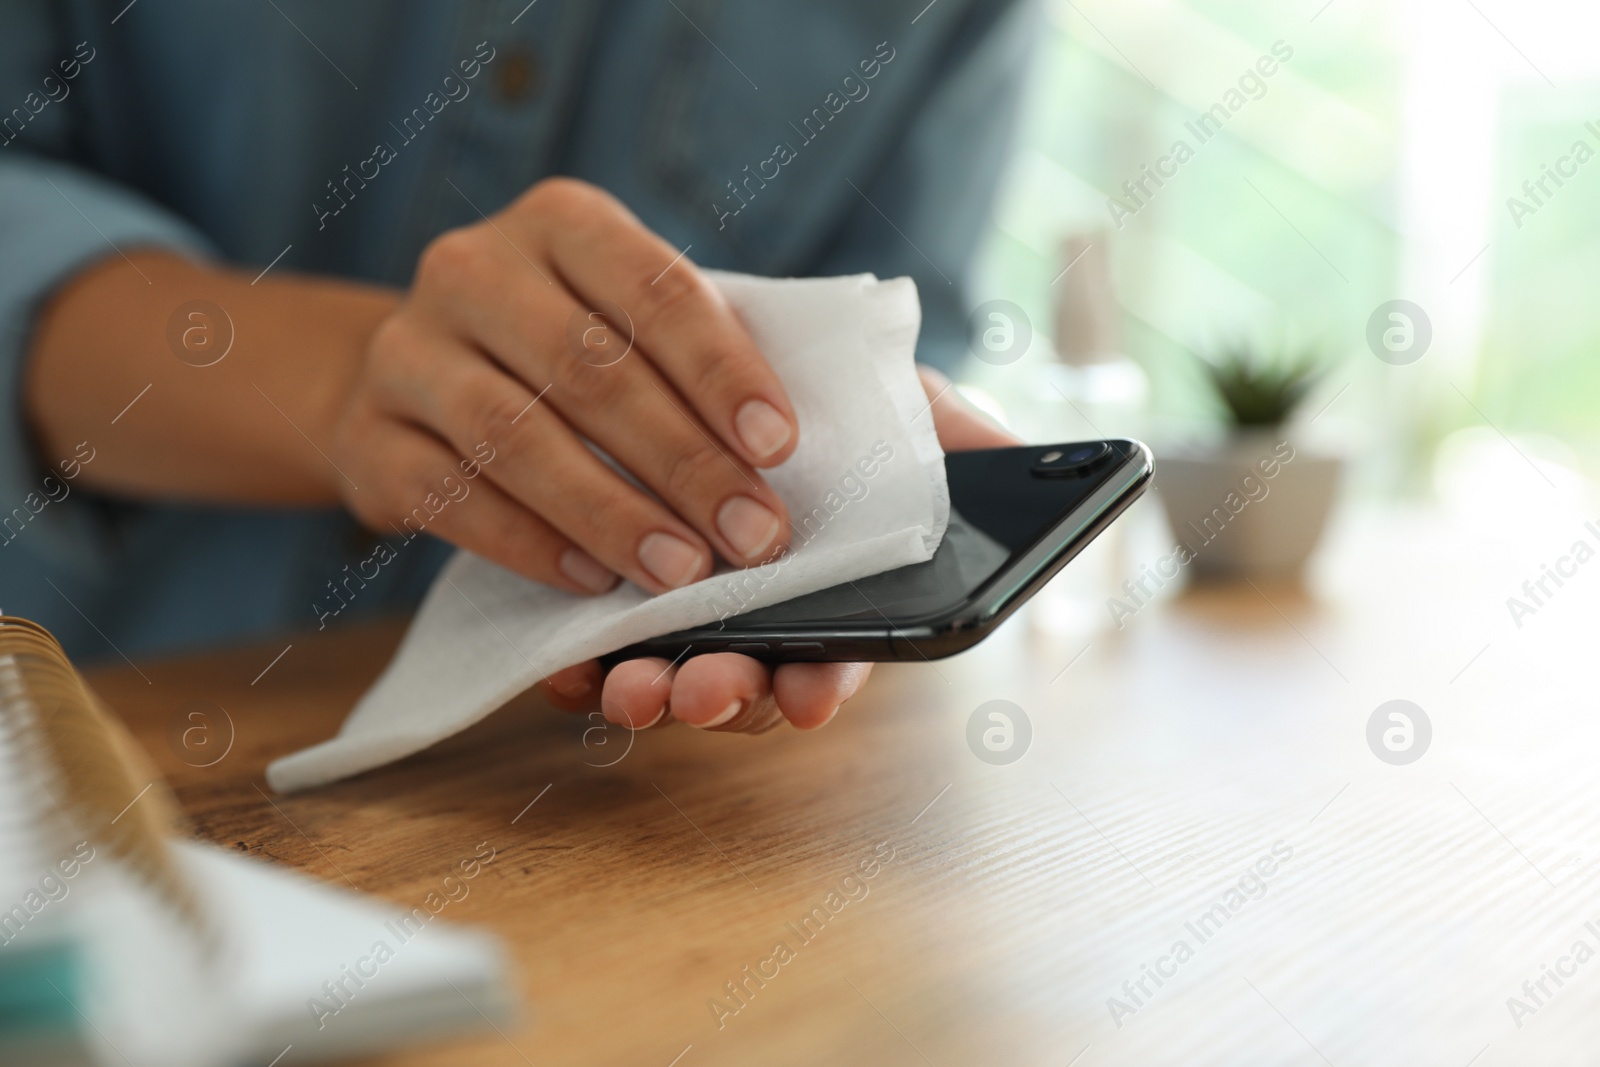 Photo of Woman cleaning smartphone with wet wipe at wooden table, closeup